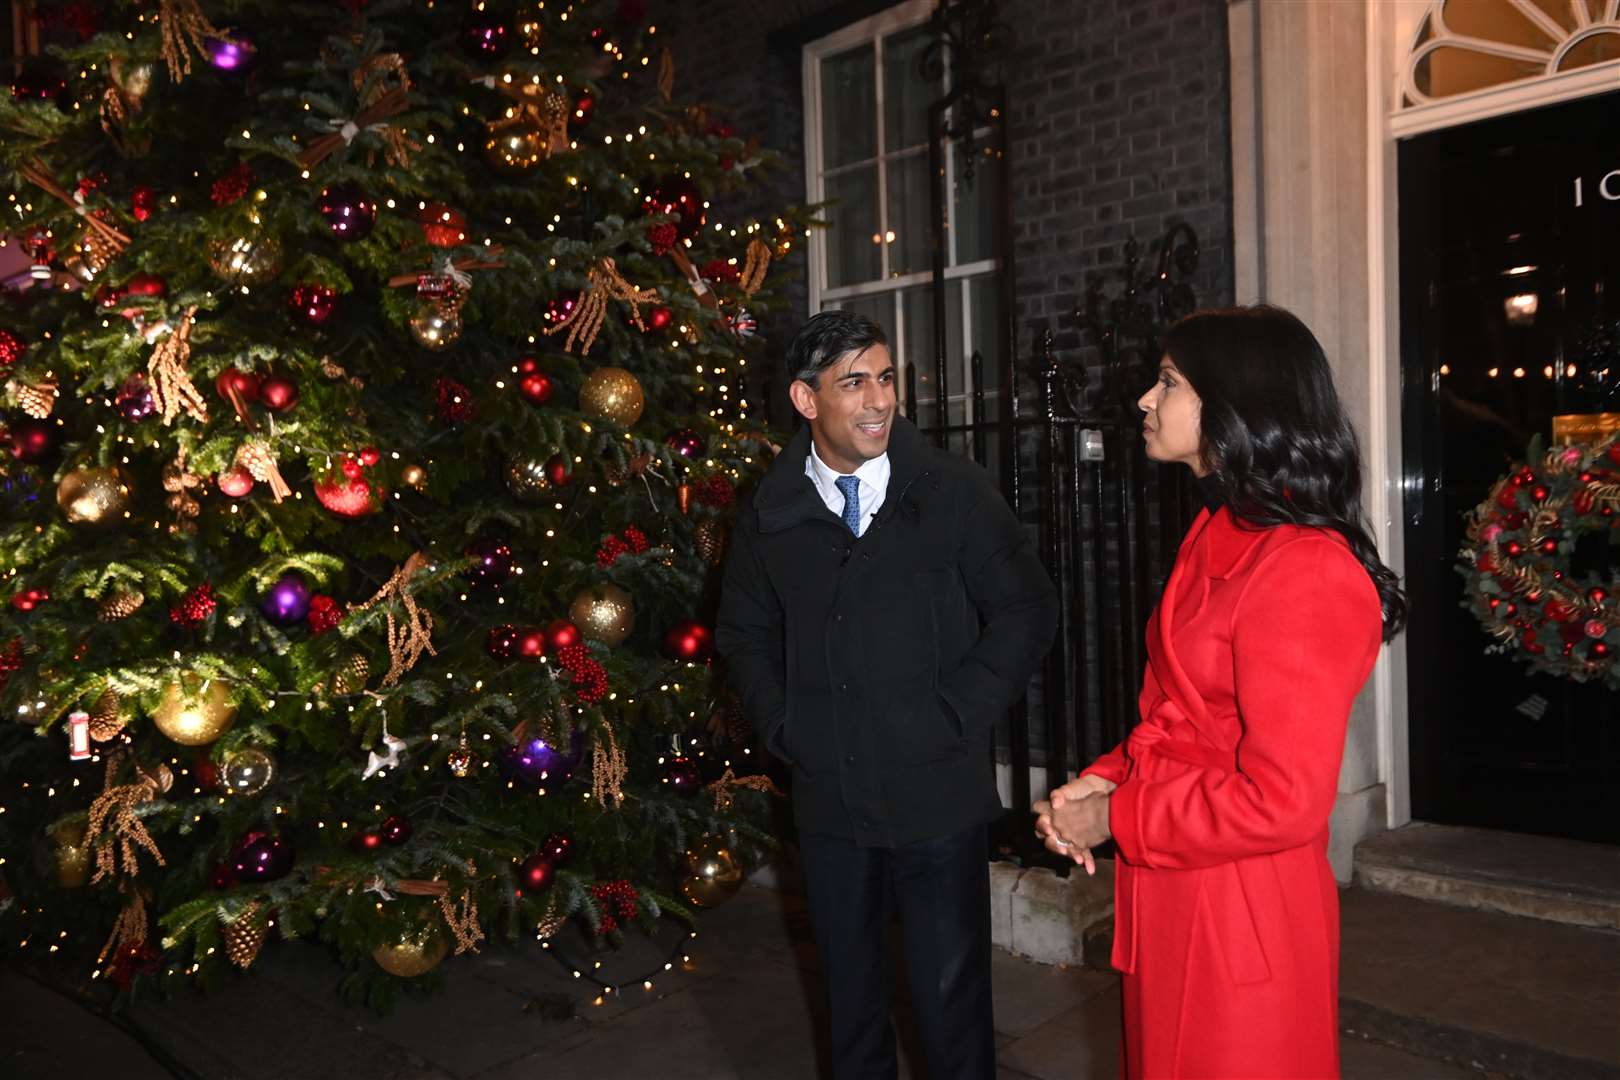 Dartmoor Christmas Tree Farm supplied the tree for Downing Street, whilst Friezeland Christmas Tree Farm provided the wreath for the door of No 10